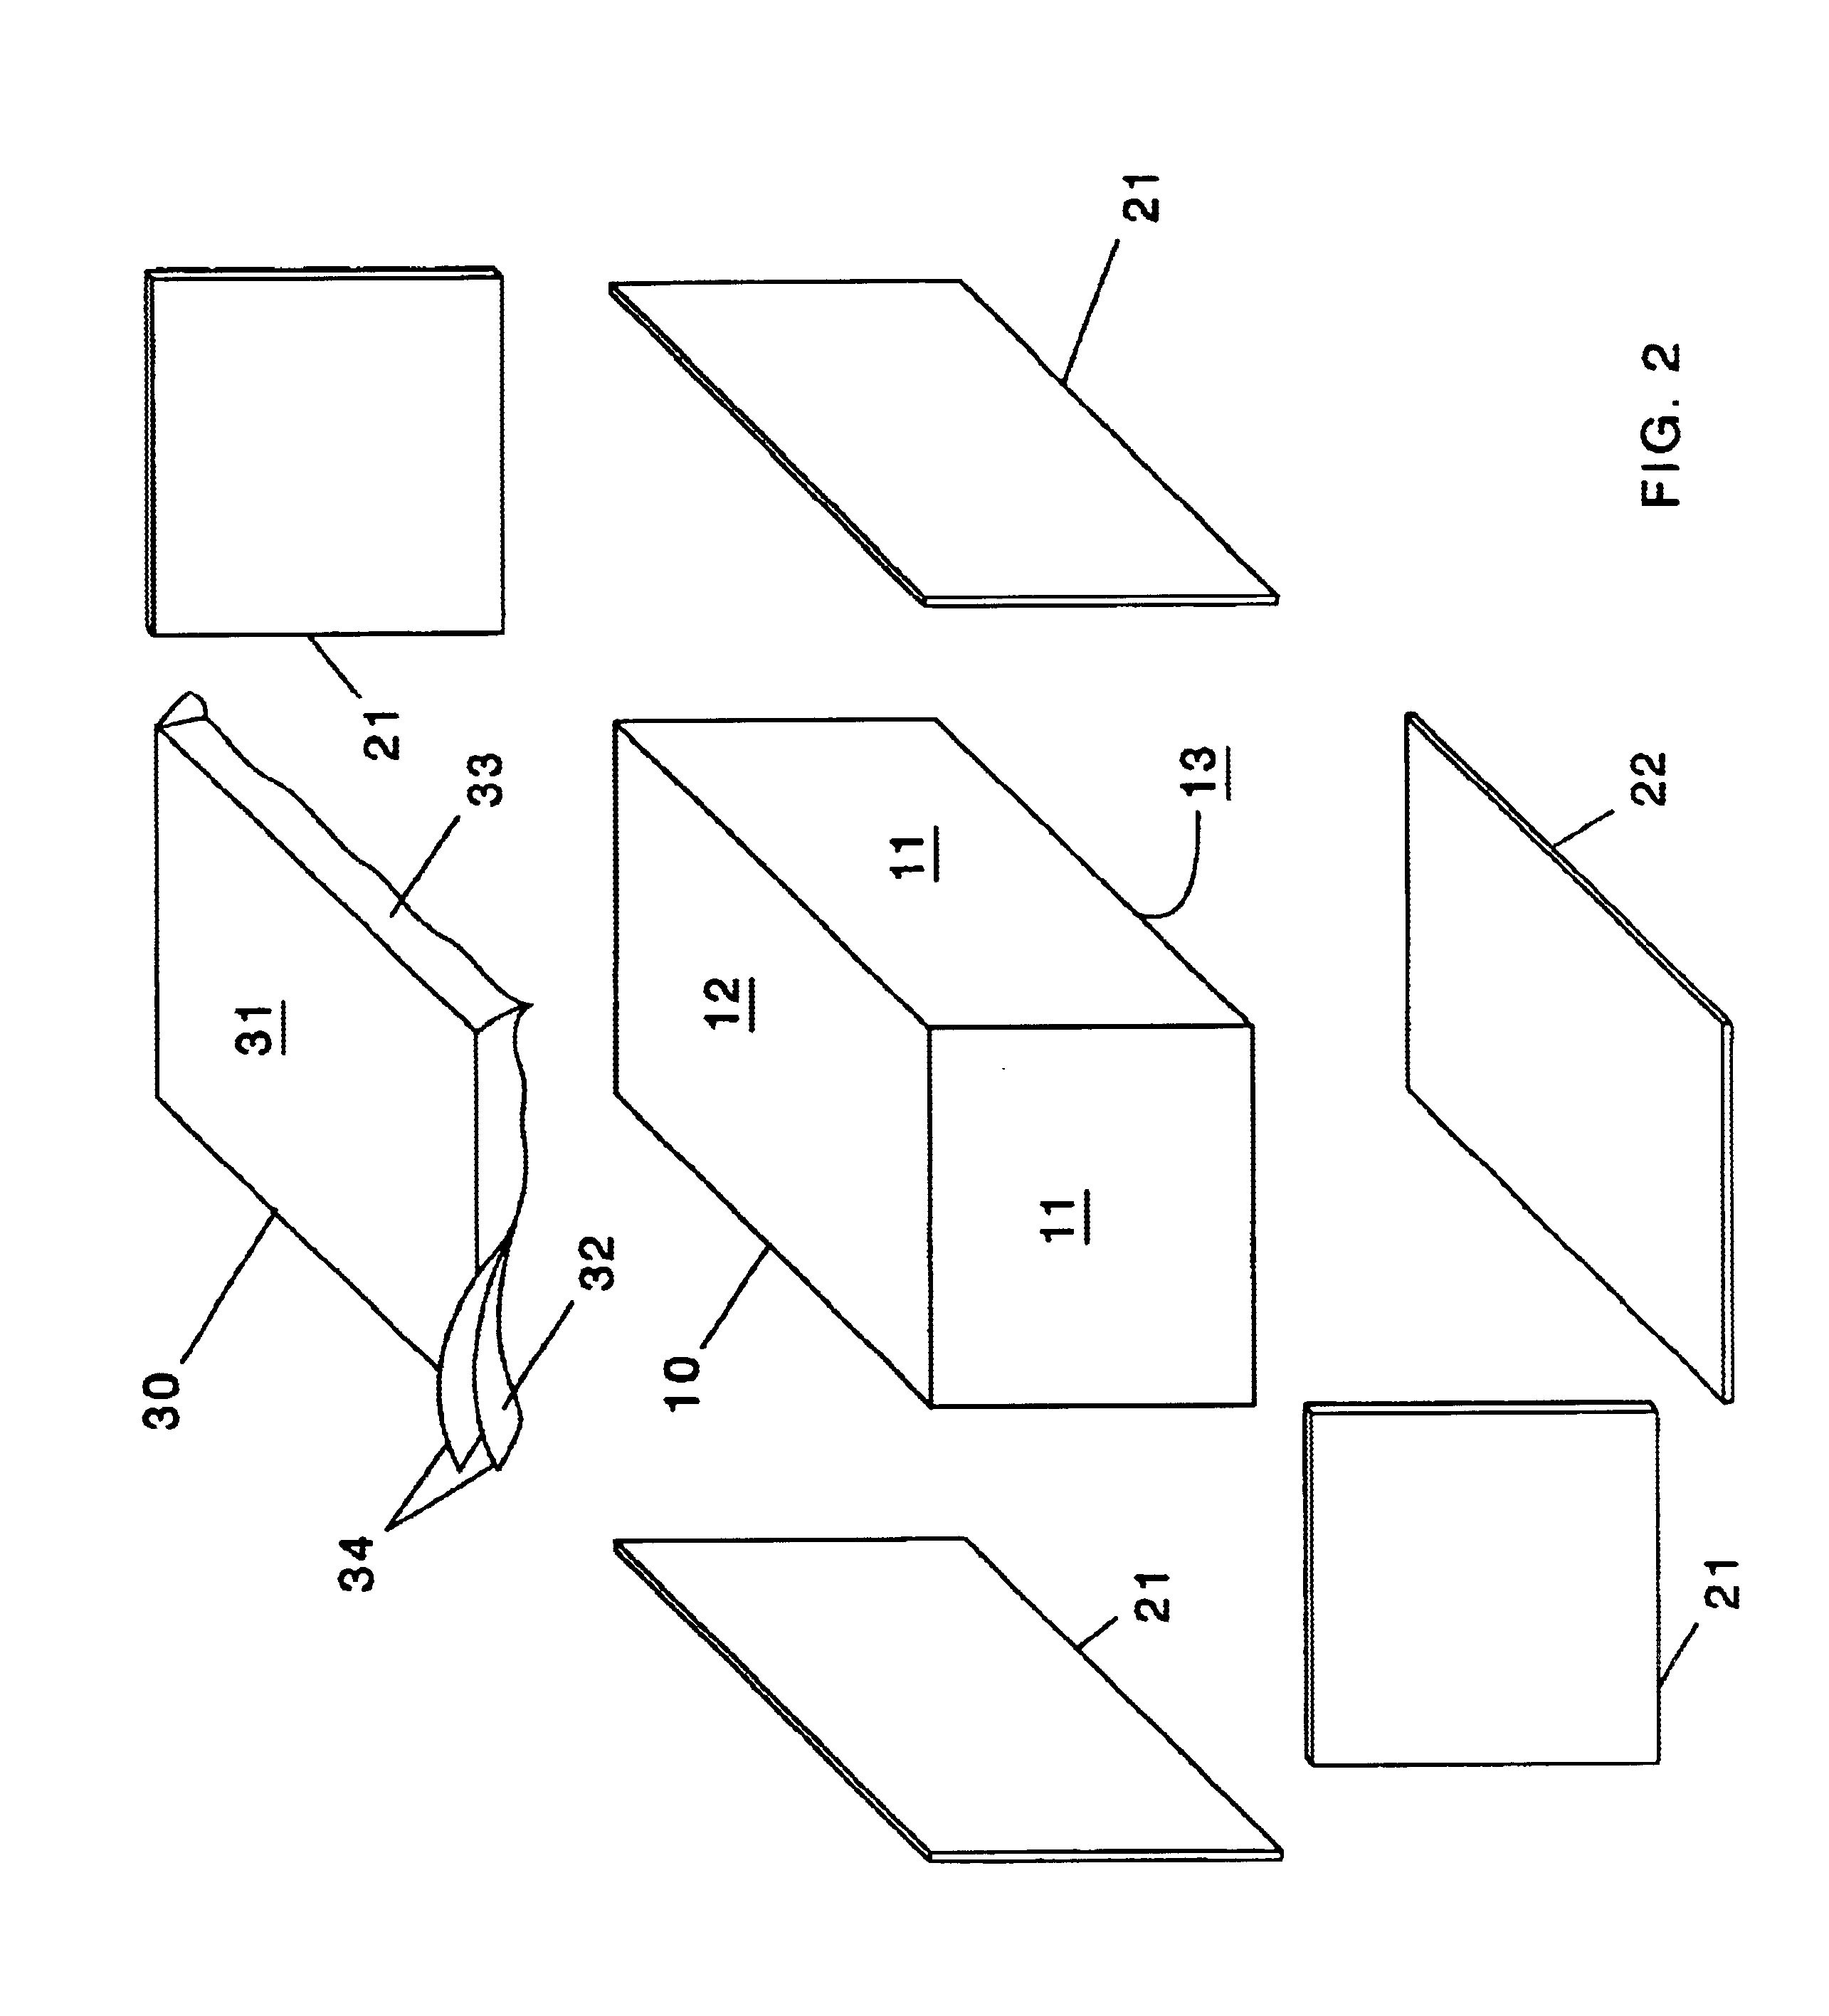 Device and method for cleaning and detecting fractures in files